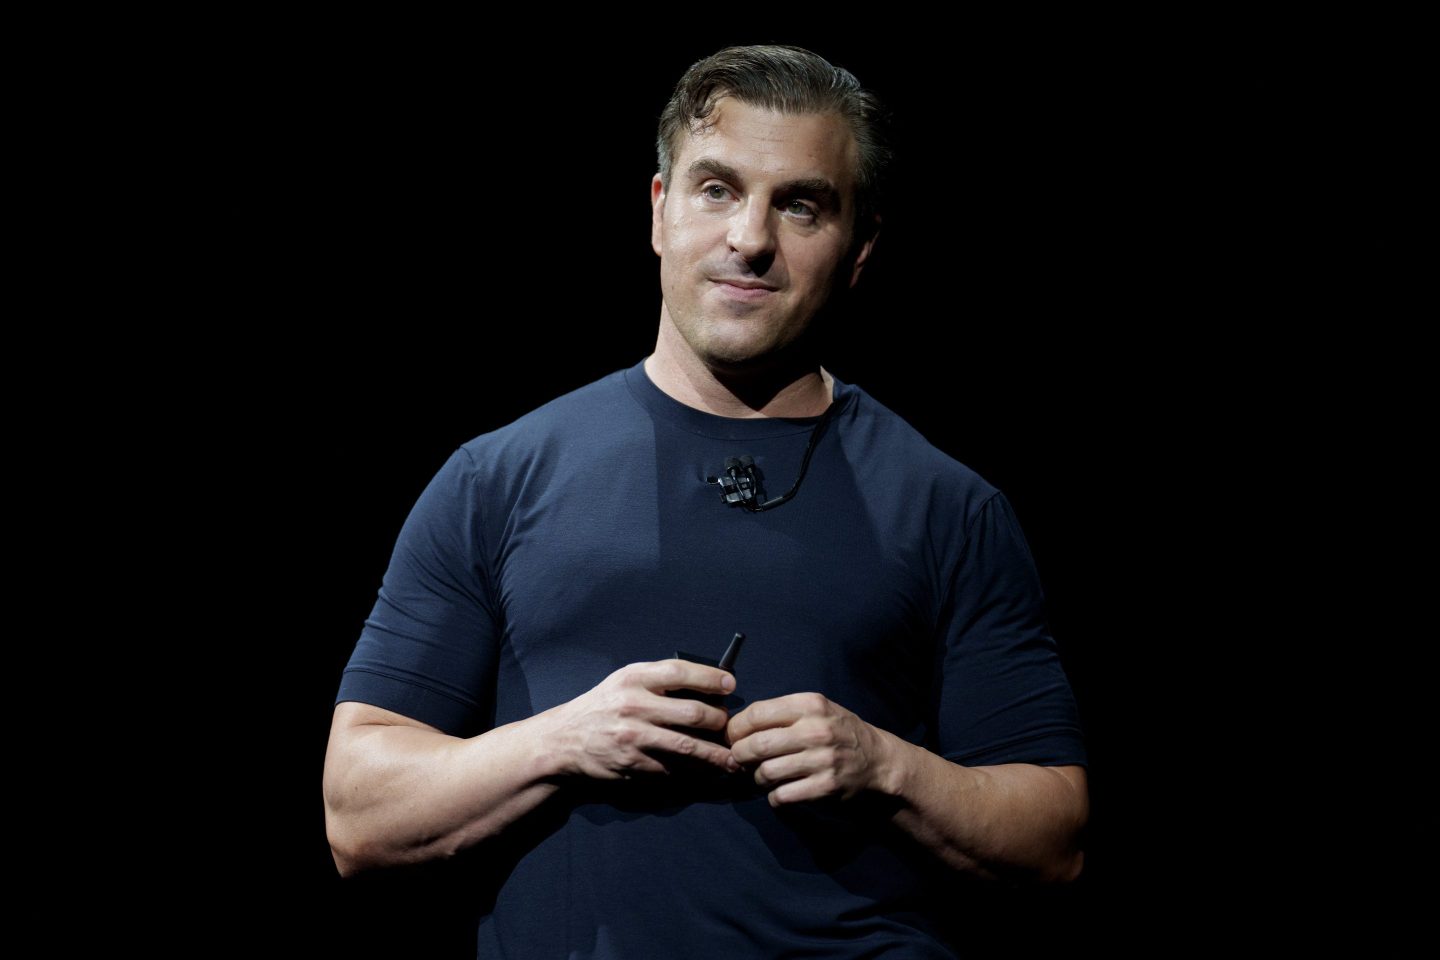 Brian Chesky, co-founder and chief executive officer of Airbnb